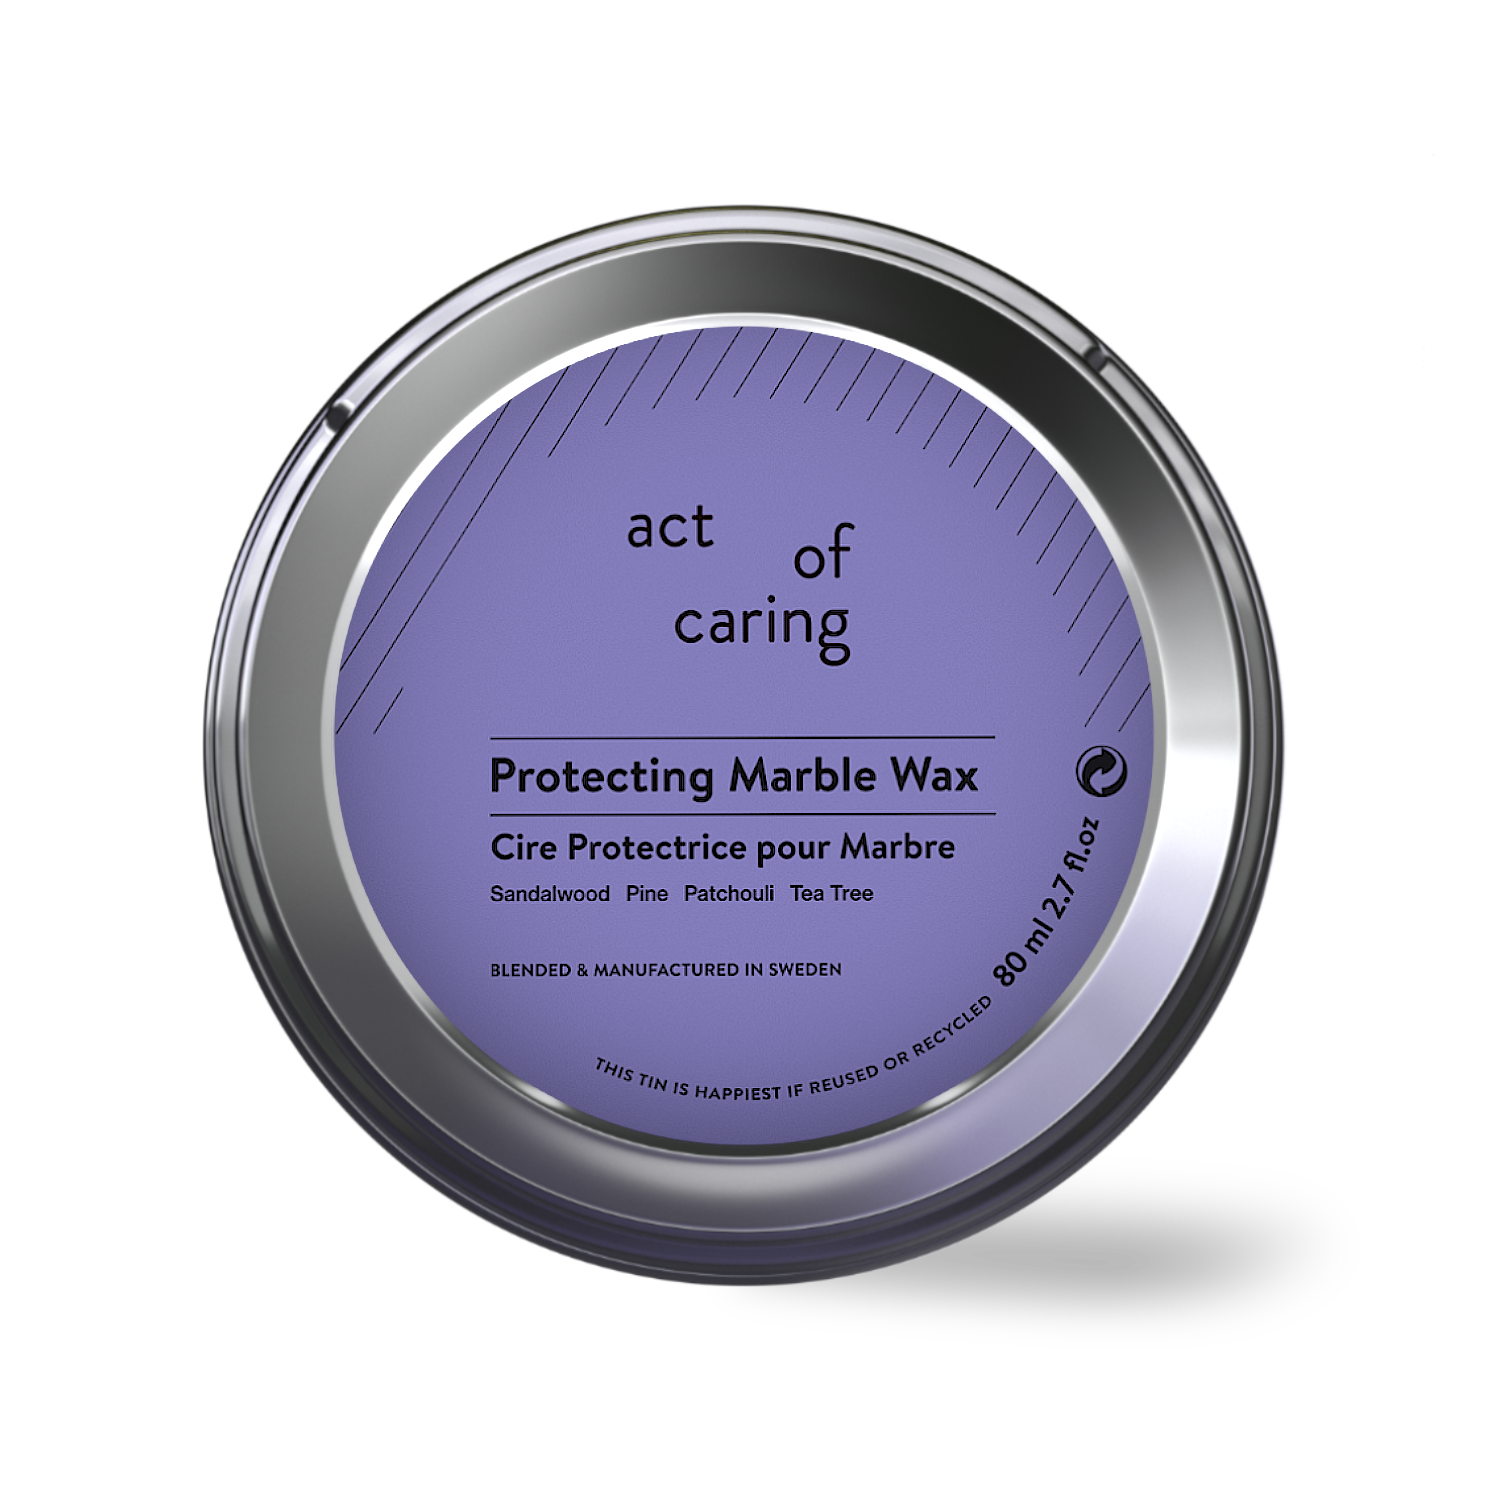 ACT OF CARING - Protecting Marble Wax